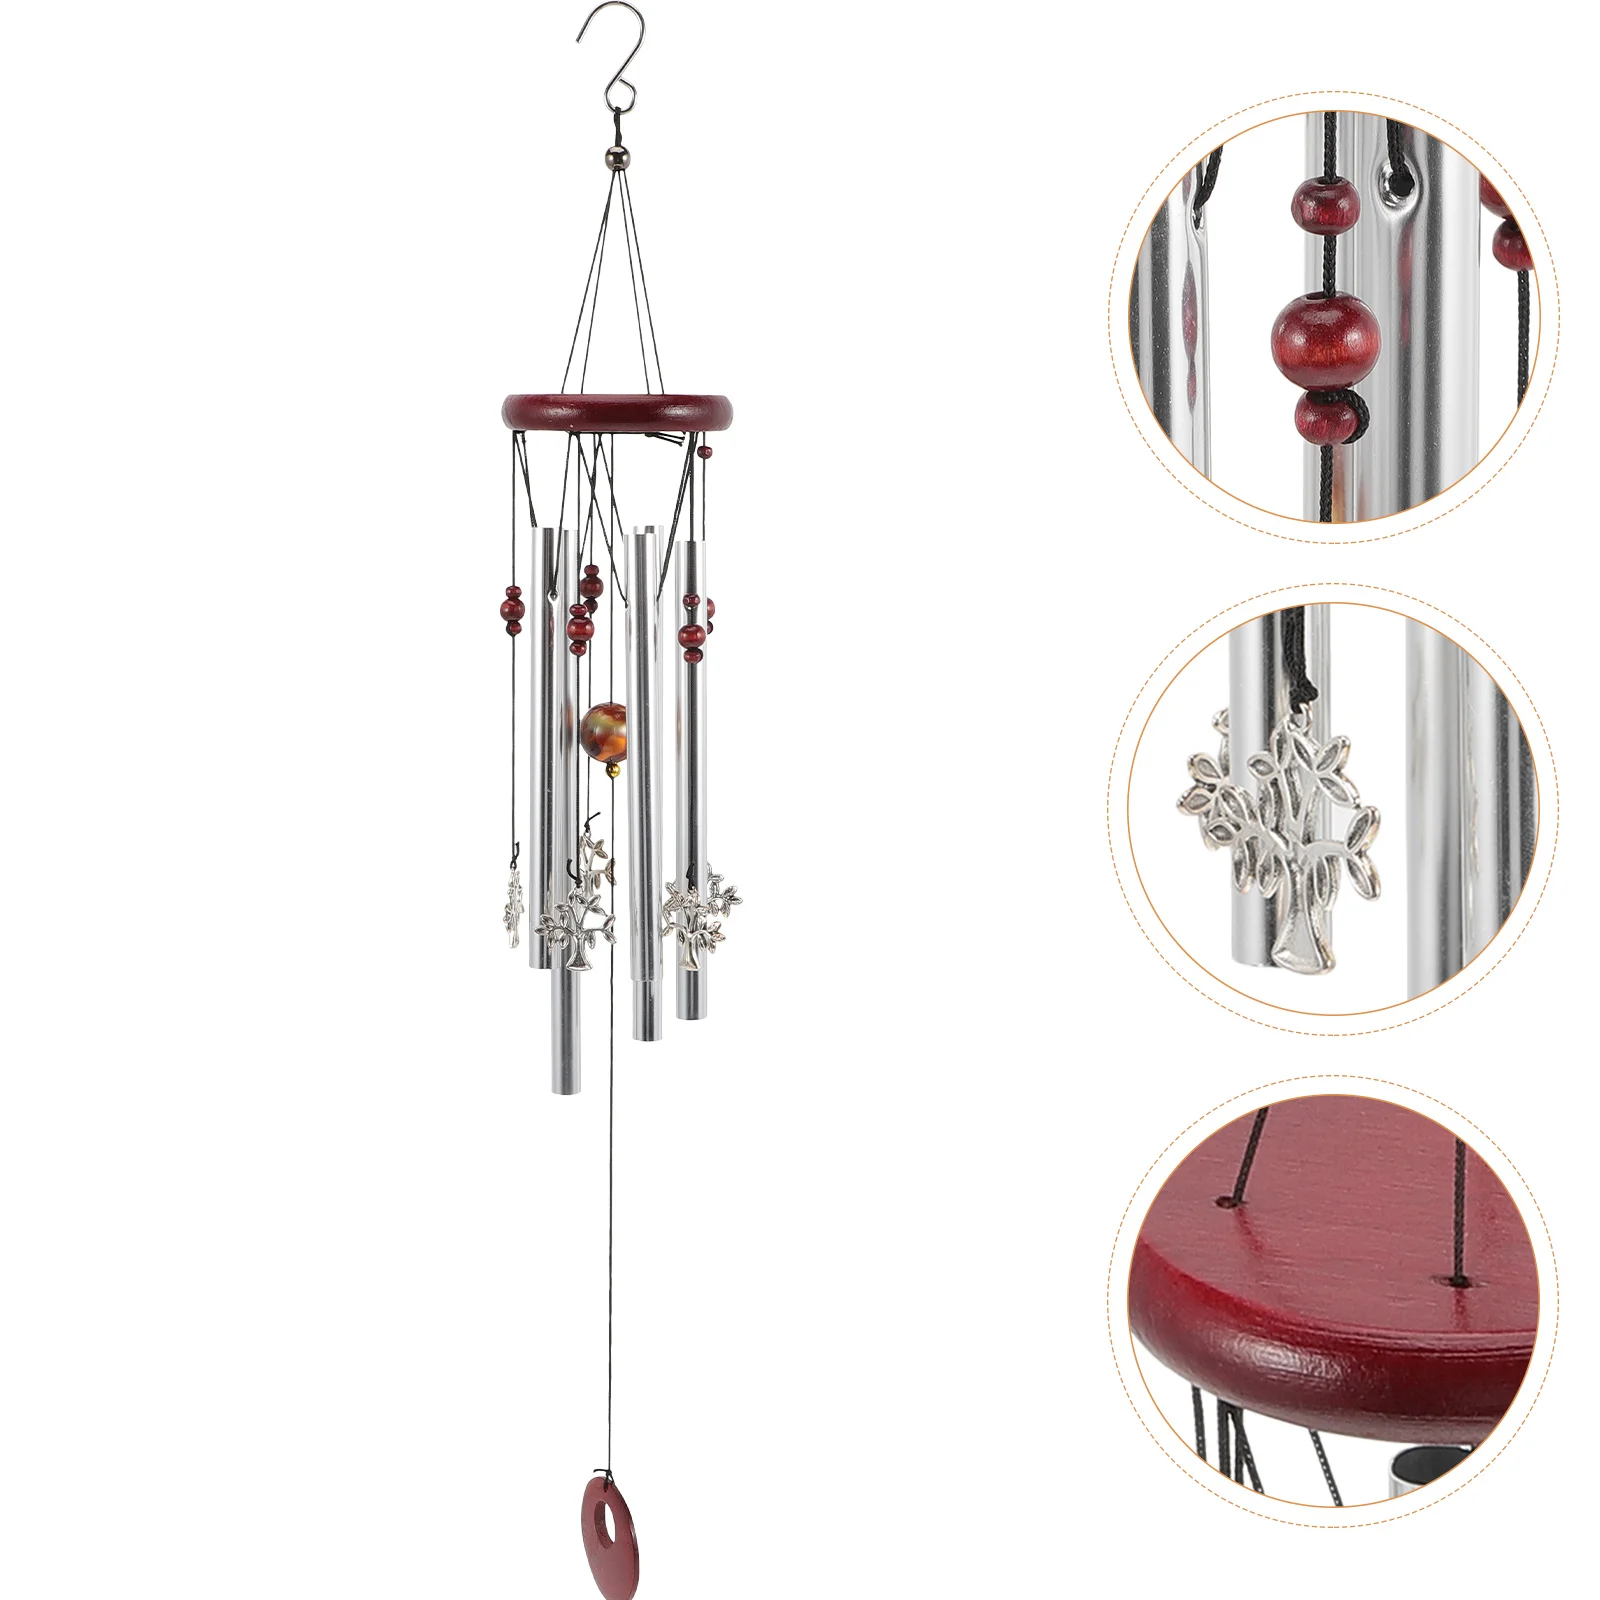 

Wind Chimes Hanging Chime Sympathy Bereavement Bell Metal Decor Bells Gift Garden Memorial Shui Feng Outside Musical Ornaments